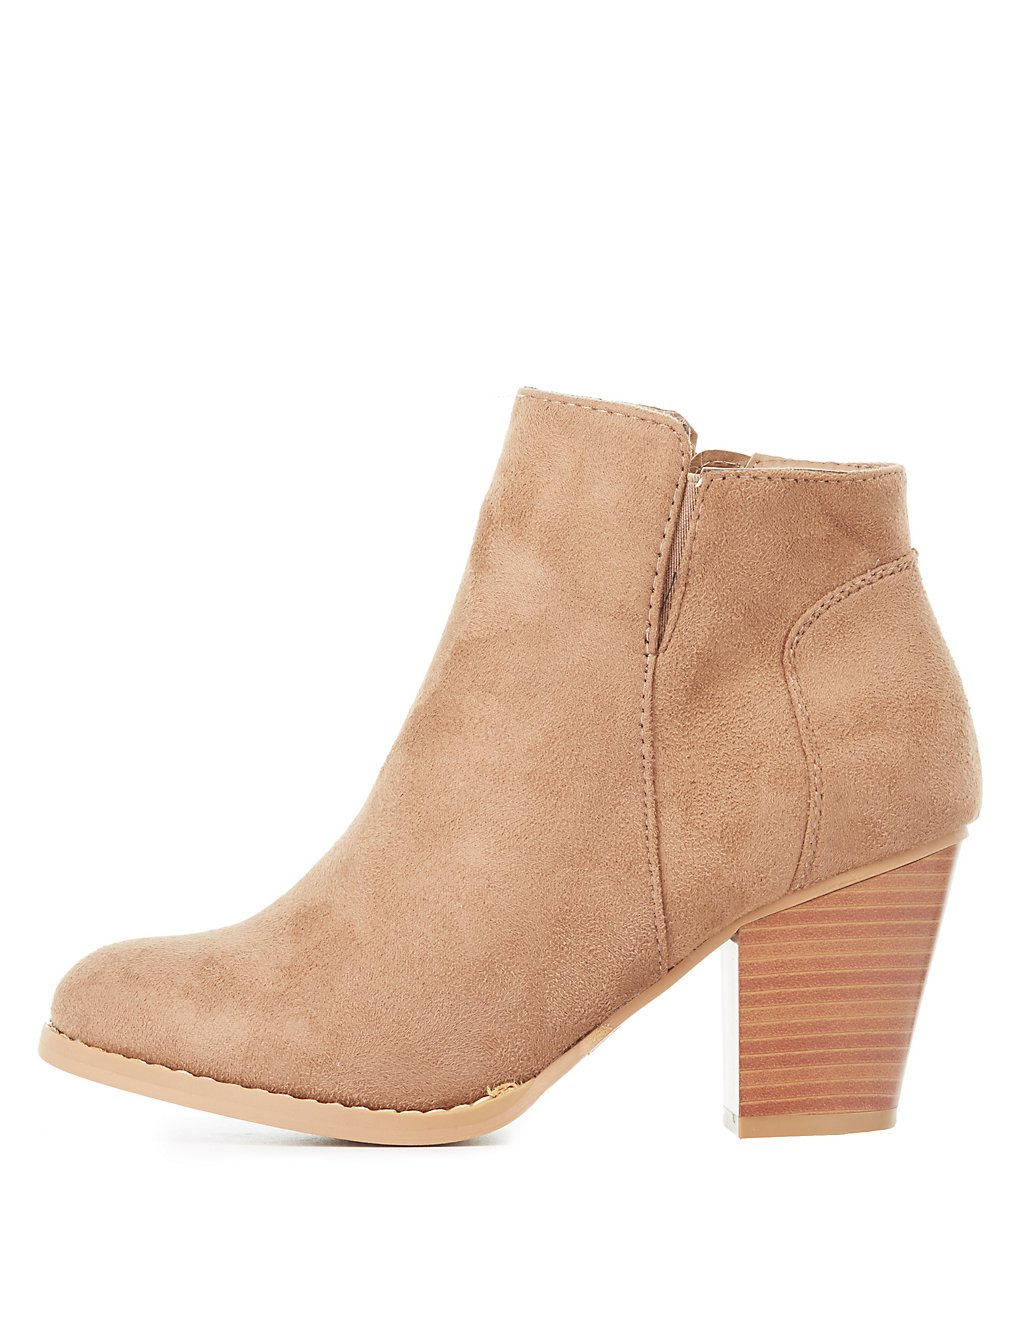 Faux Suede Boot from Charlotte Russe